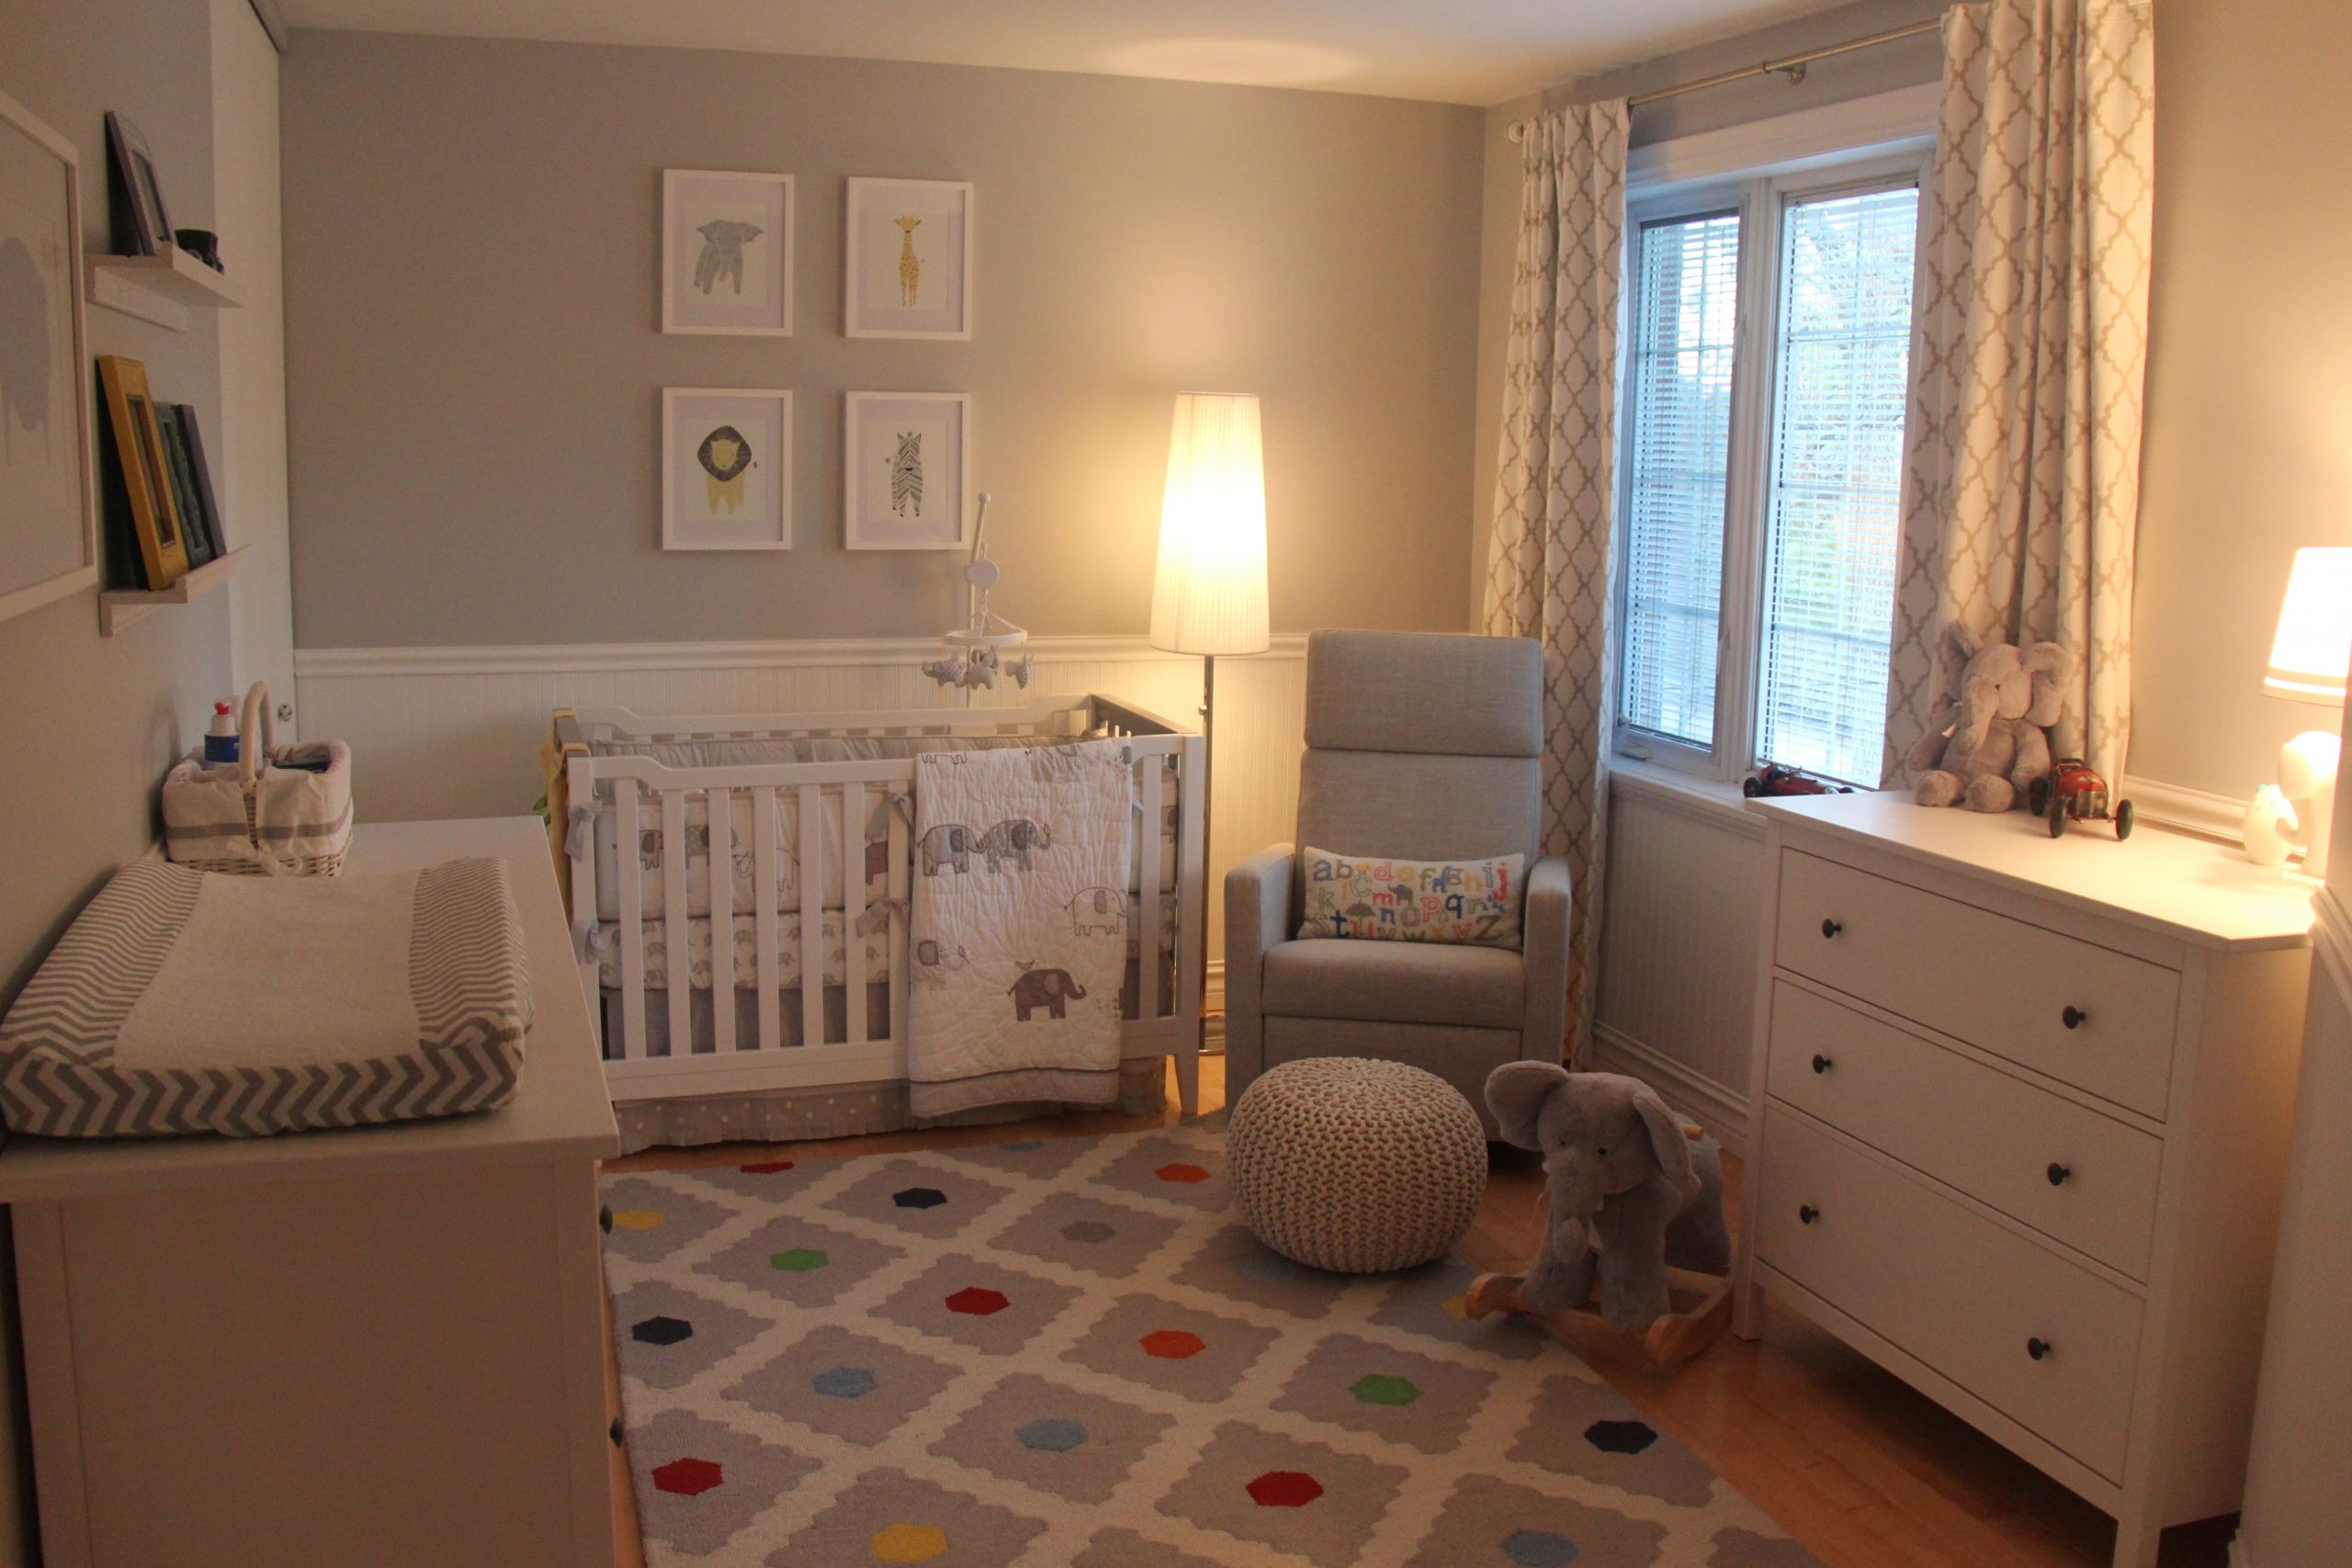 Unisex Baby Room Decorating Ideas
 Our Little Baby Boy s Neutral Room Project Nursery